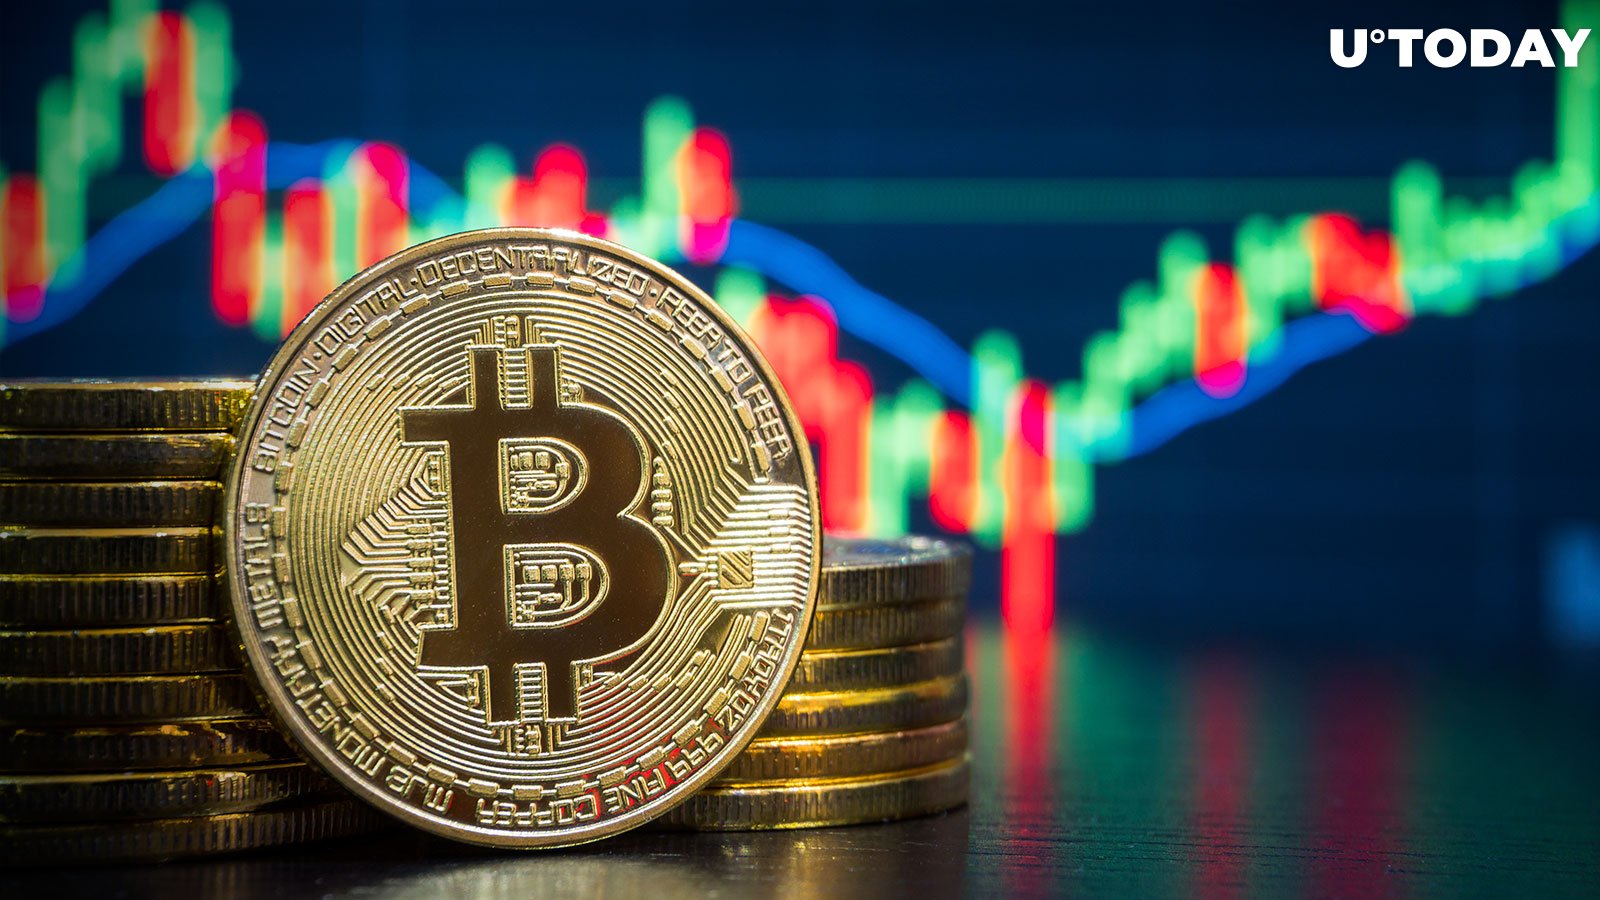 Bitcoin (BTC) to Hit $50K After Bullish Weekly Divergence, Says Top Analyst